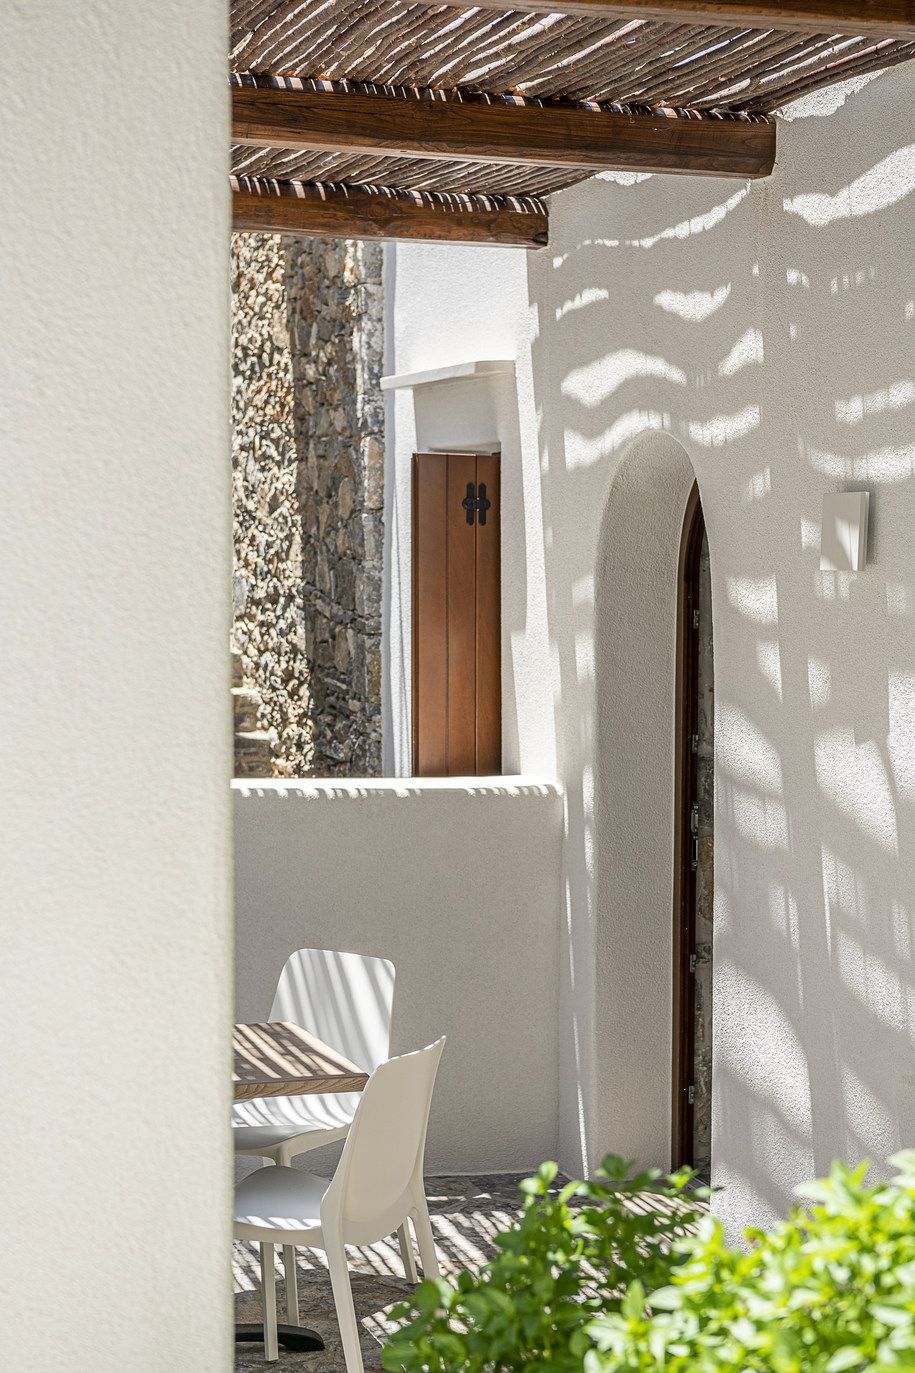 Archisearch The Authentic Village Hotel in Sfakia, Crete | by InDetail Architecture